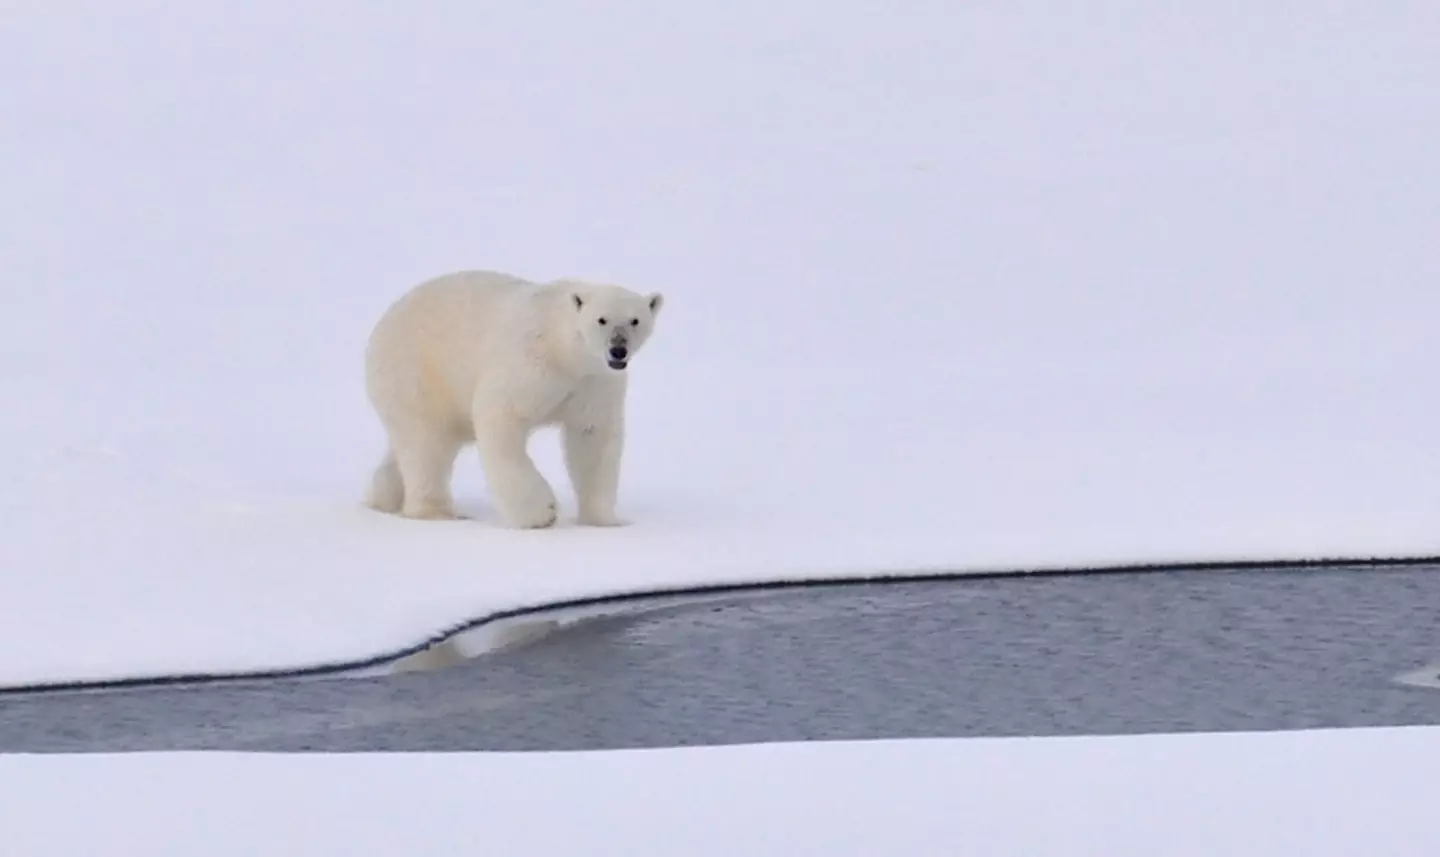 Polar bears are often described as the poster child for the impacts of climate change.